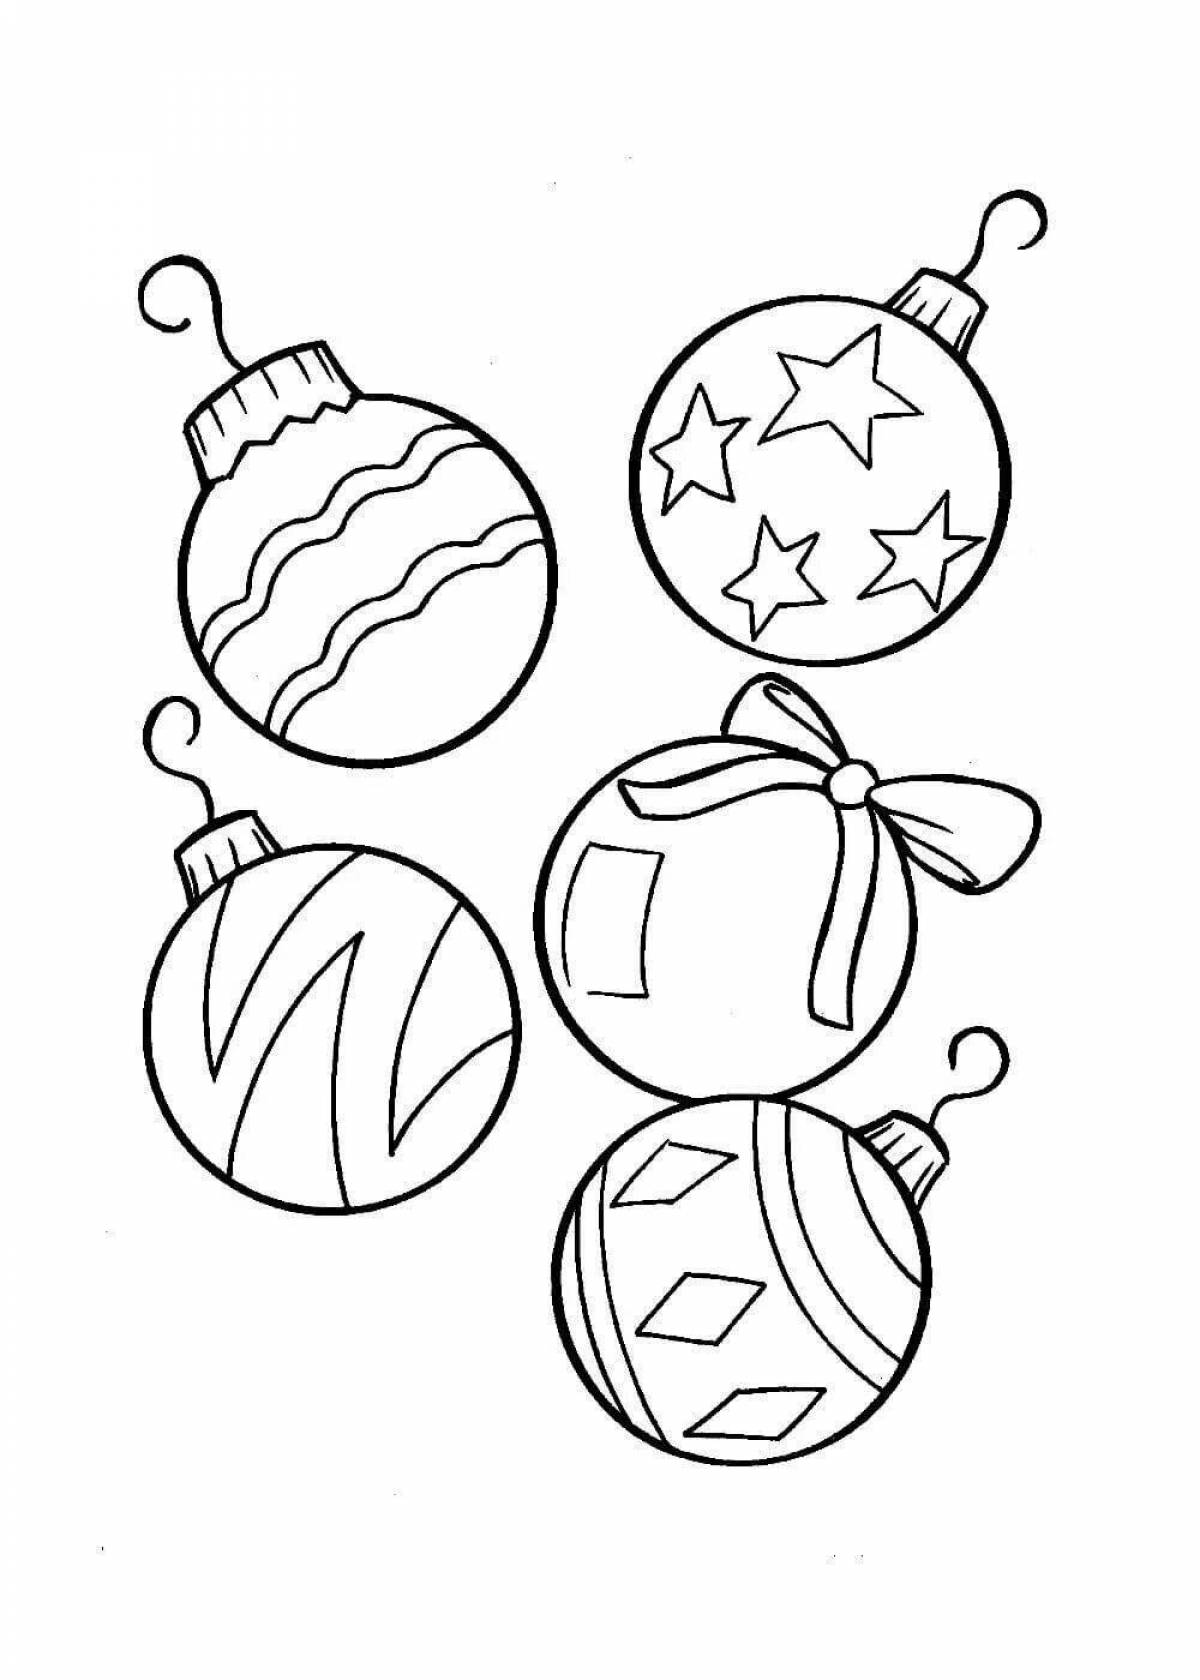 Coloring Christmas decorations